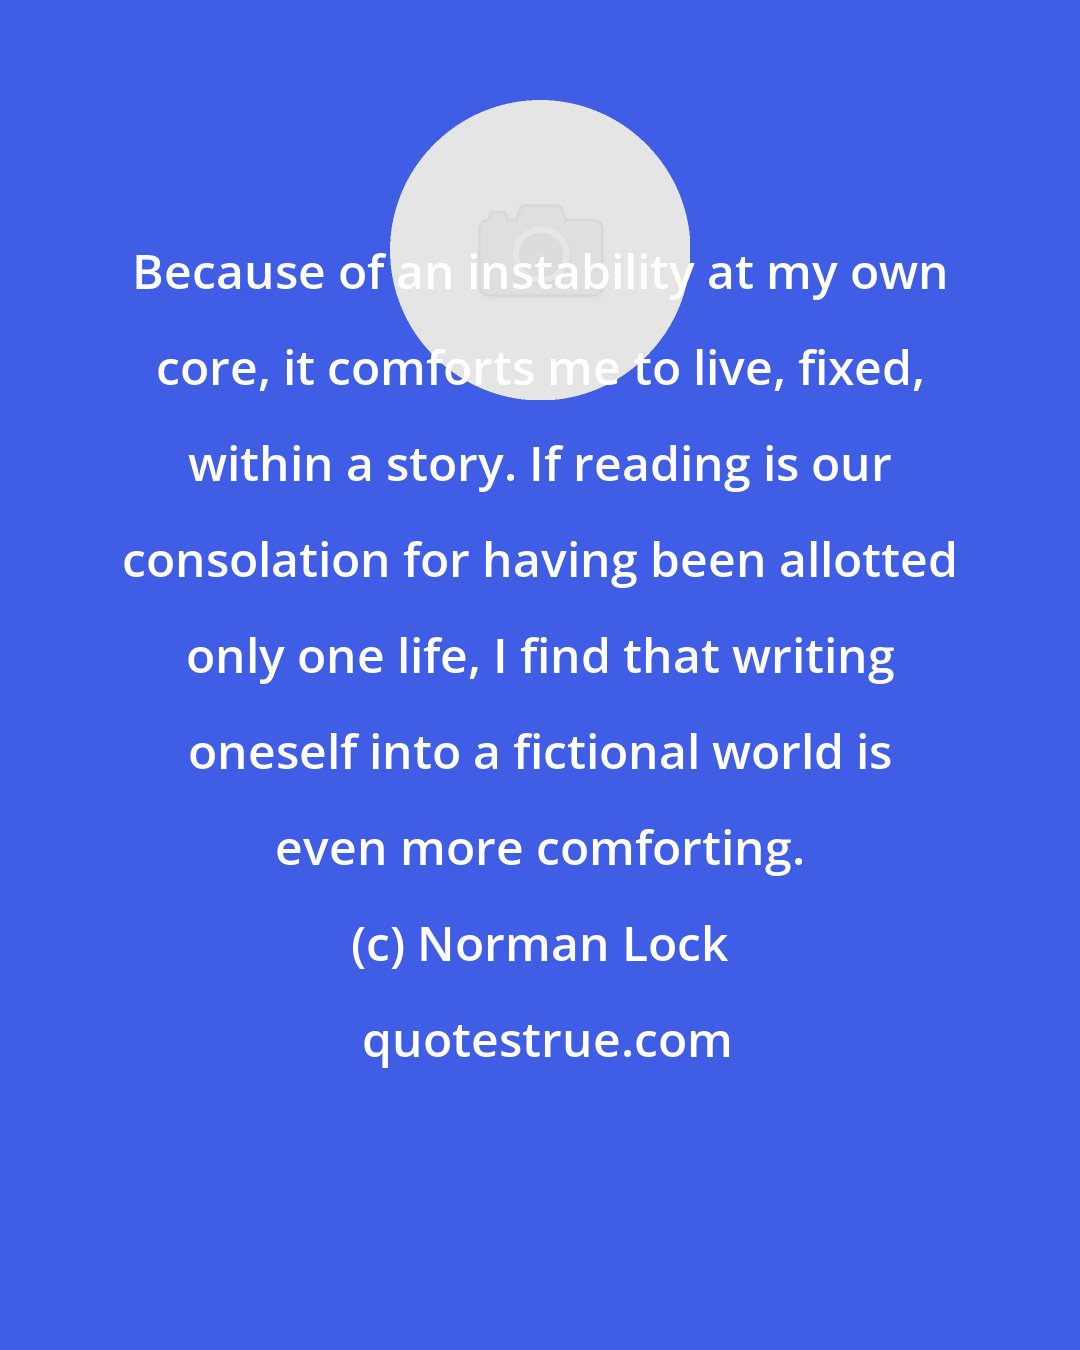 Norman Lock: Because of an instability at my own core, it comforts me to live, fixed, within a story. If reading is our consolation for having been allotted only one life, I find that writing oneself into a fictional world is even more comforting.